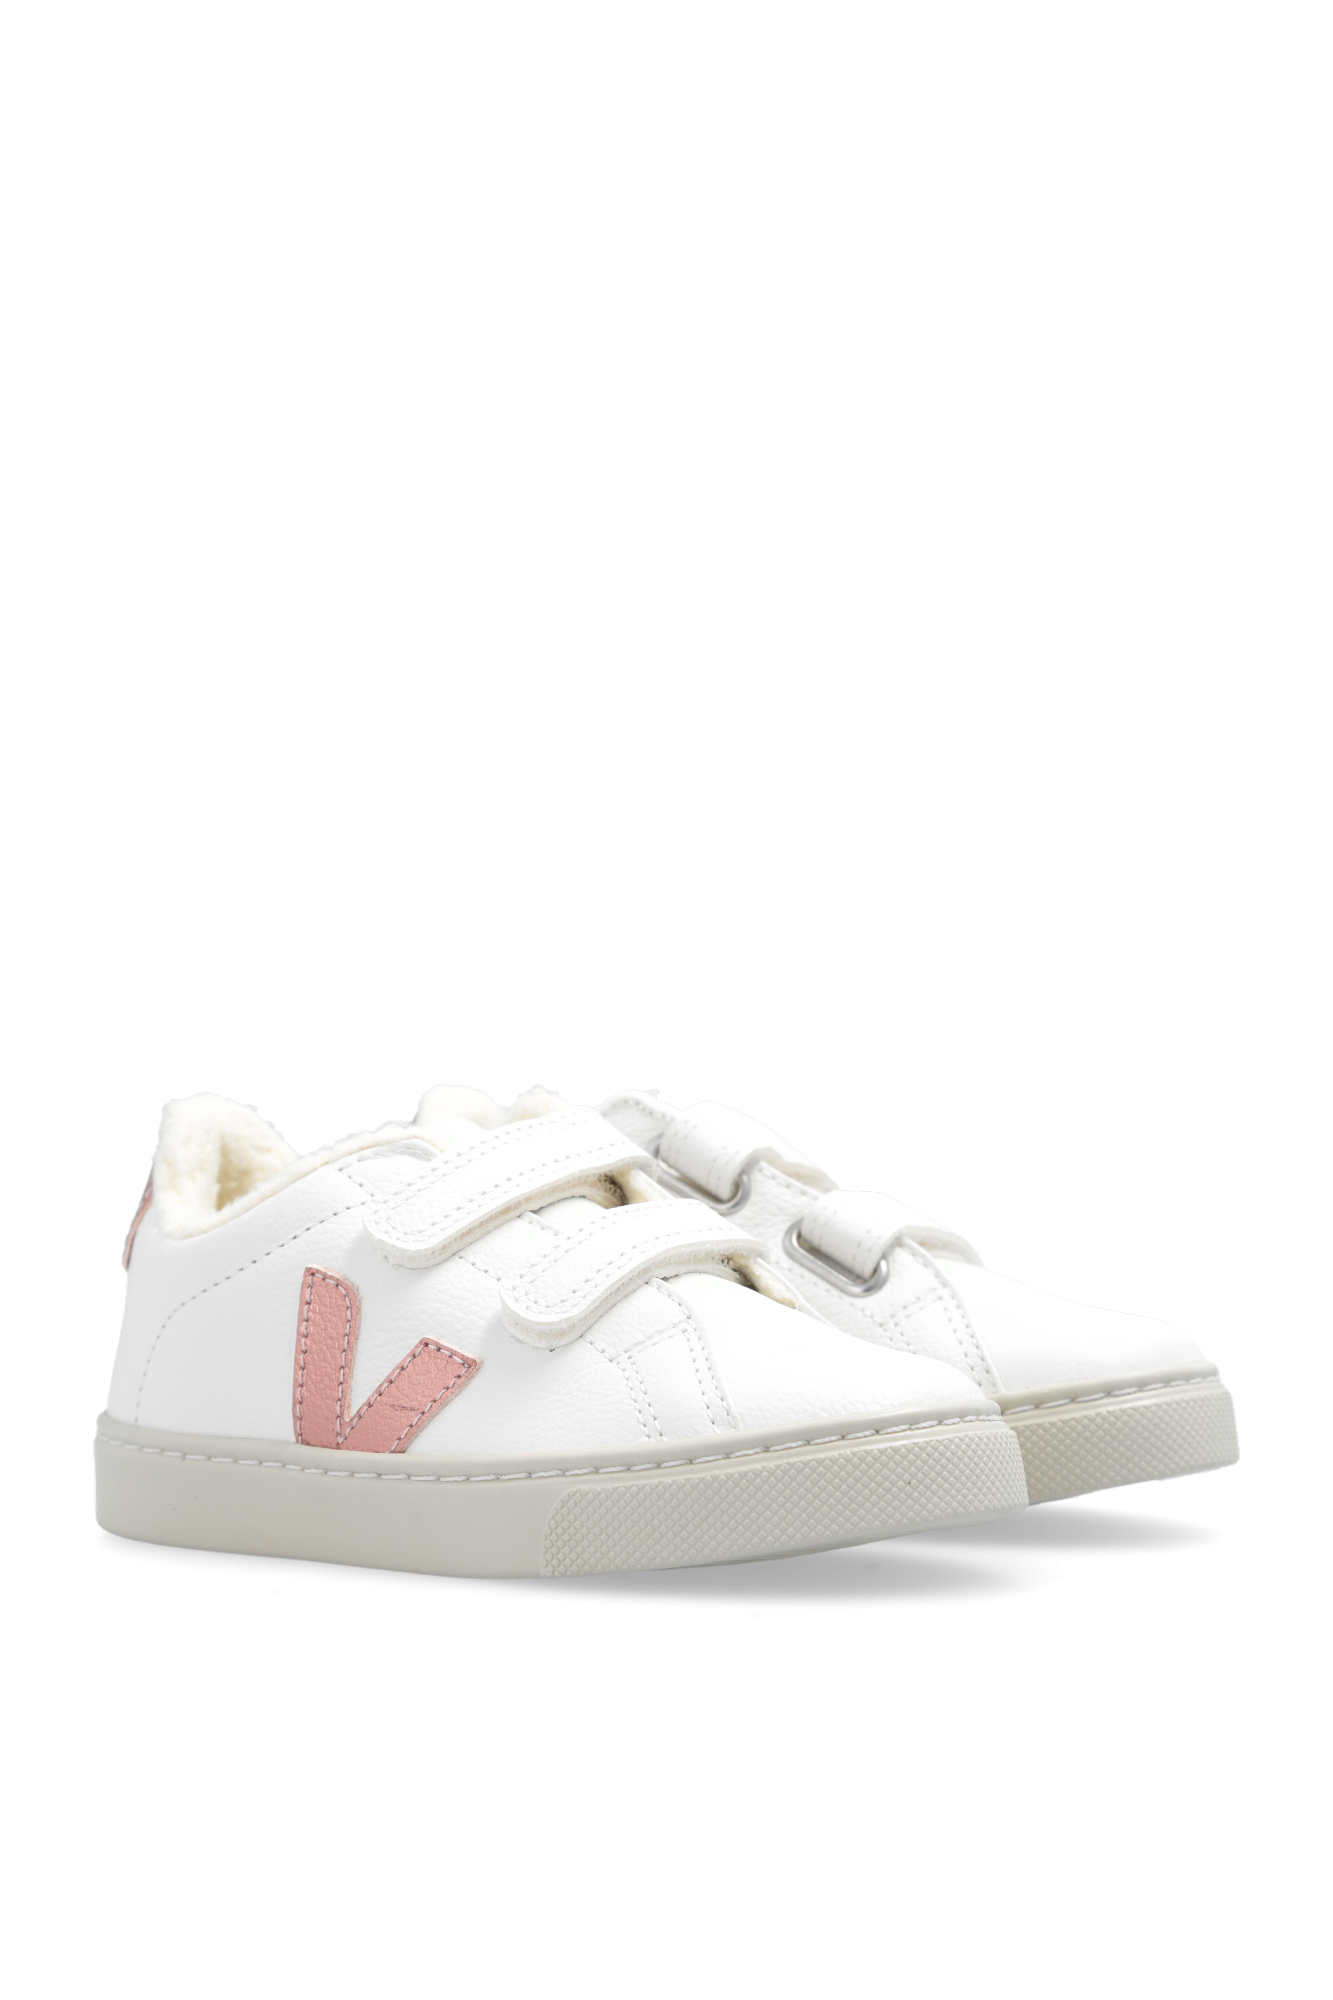 Veja Kids ‘Extra White Nacre’ leather sneakers